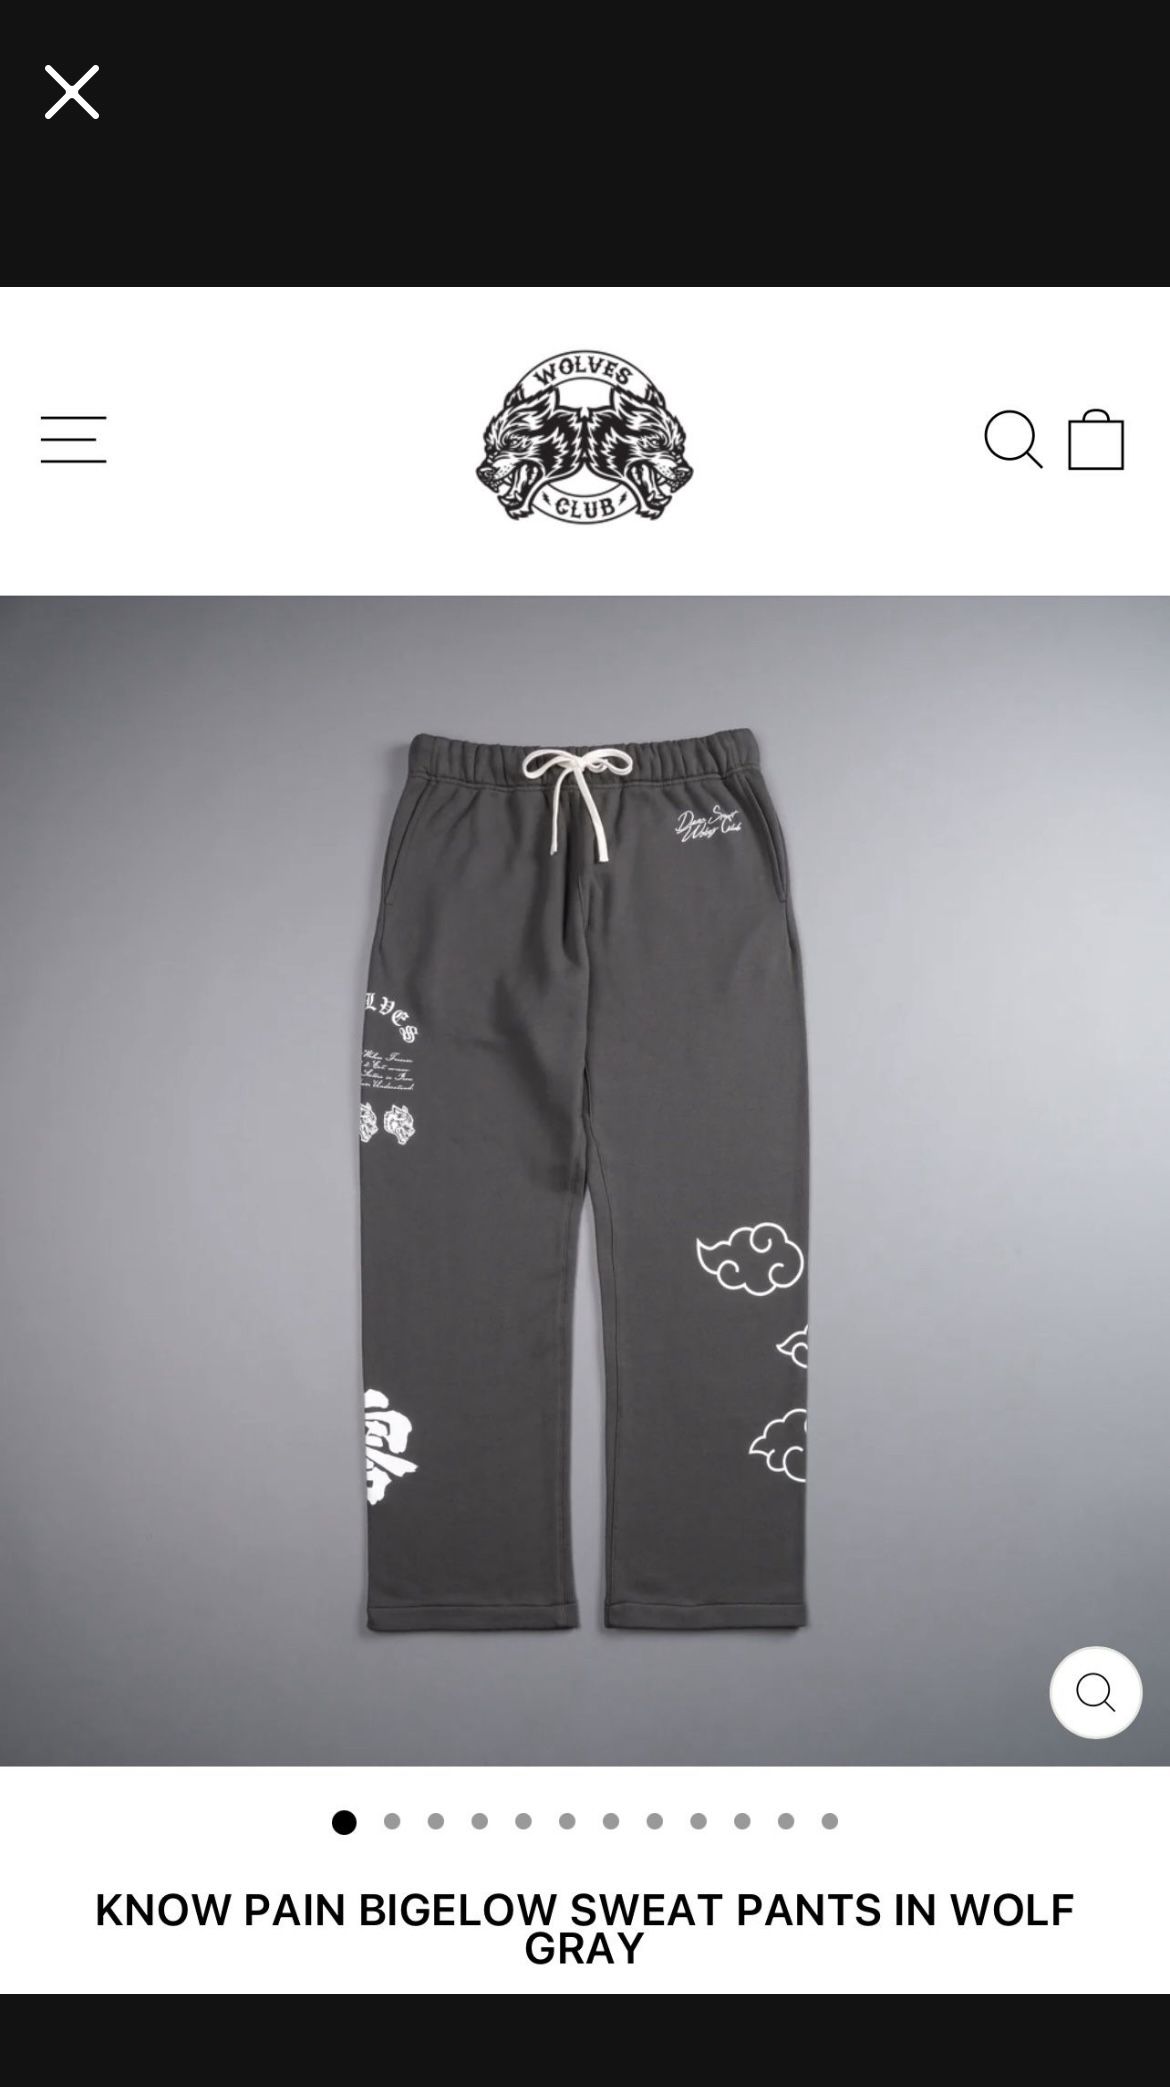 Know Pain Bigelow Sweat Pants in Wolf Gray